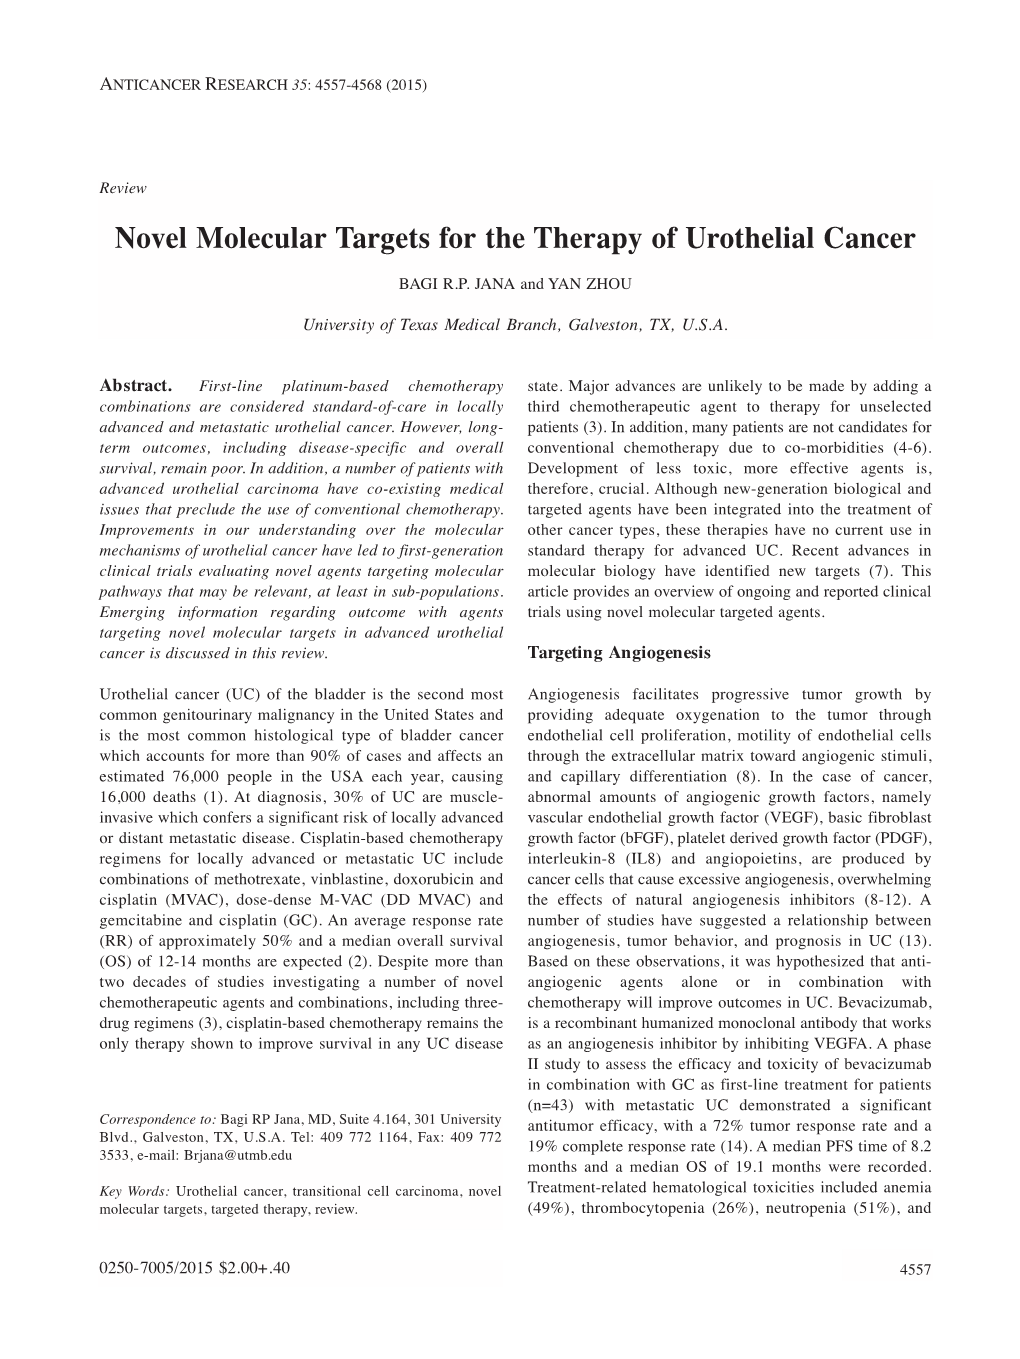 Novel Molecular Targets for the Therapy of Urothelial Cancer